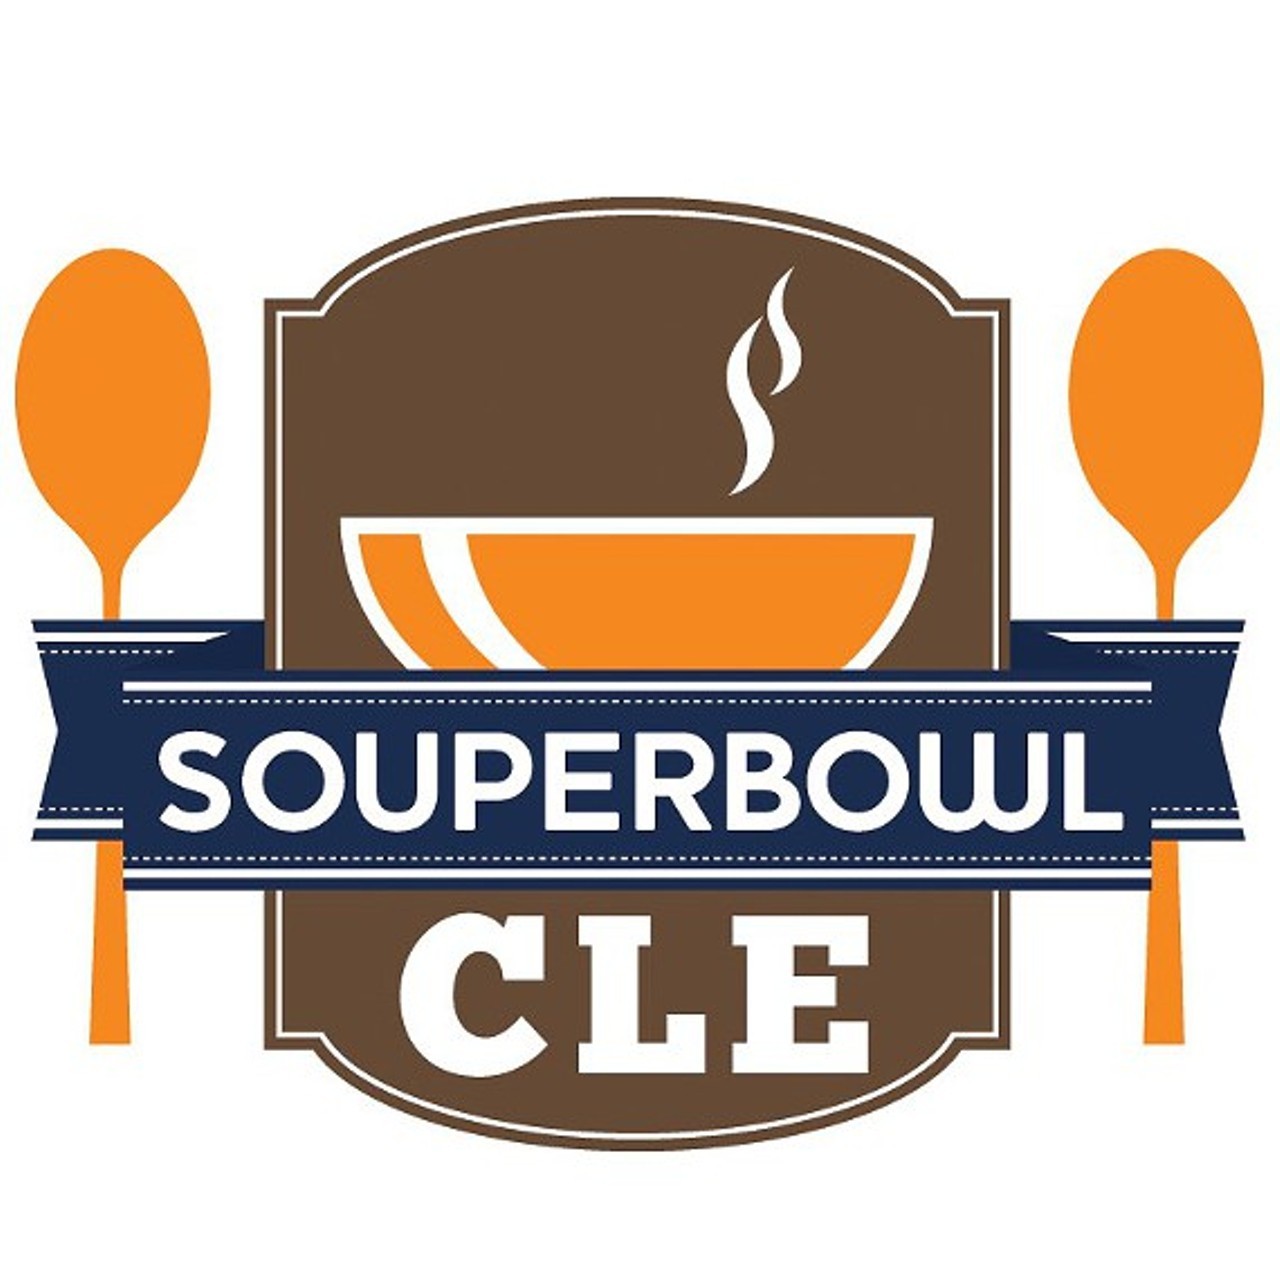 SouperBowl CLE 
When: Sat., Nov. 12, 11 a.m.-3 p.m. 
Phone: 216-200-8879 
Email: lisa@souperbowlcle.com 
Price: 25 
www.souperbowlcle.com
SouperBowl CLE II is set to turn up the heat in the Gordon Square Arts District on Saturday, November 12, 2016. SouperBowl CLE tickets are $25 per person. Proceeds from this year's event will benefit the West Side Catholic Center. Check-in is at Cleveland Public Theatre. Event attendees will act as judges as they spend the afternoon visiting the neighborhood businesses and tasting soups prepared and served by more than 20 local independent restaurants. Attendees will then vote by text for their favorite soups in various categories, including the prestigious title of "Best Soup in Cleveland".